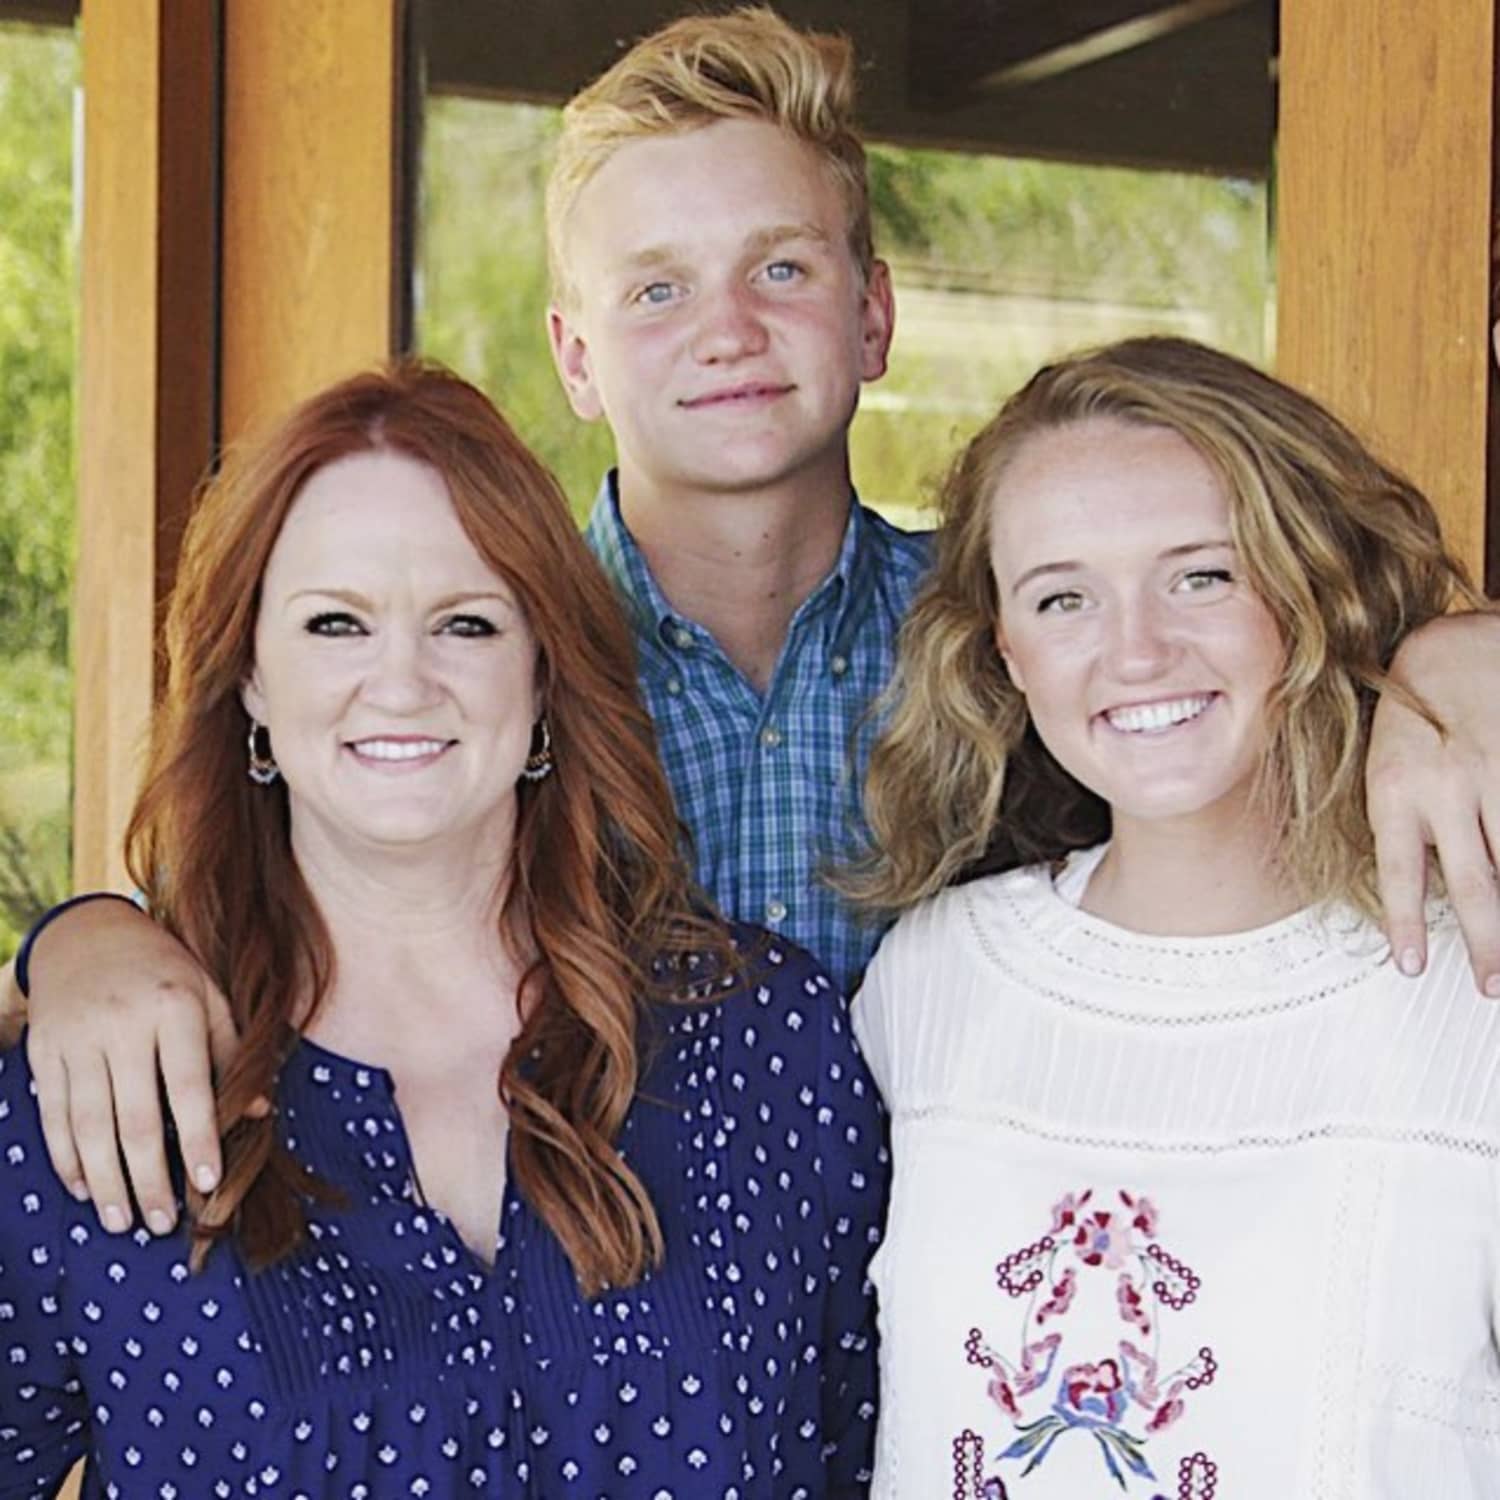 How Ree Drummond Turned Her Blog Into An Empire